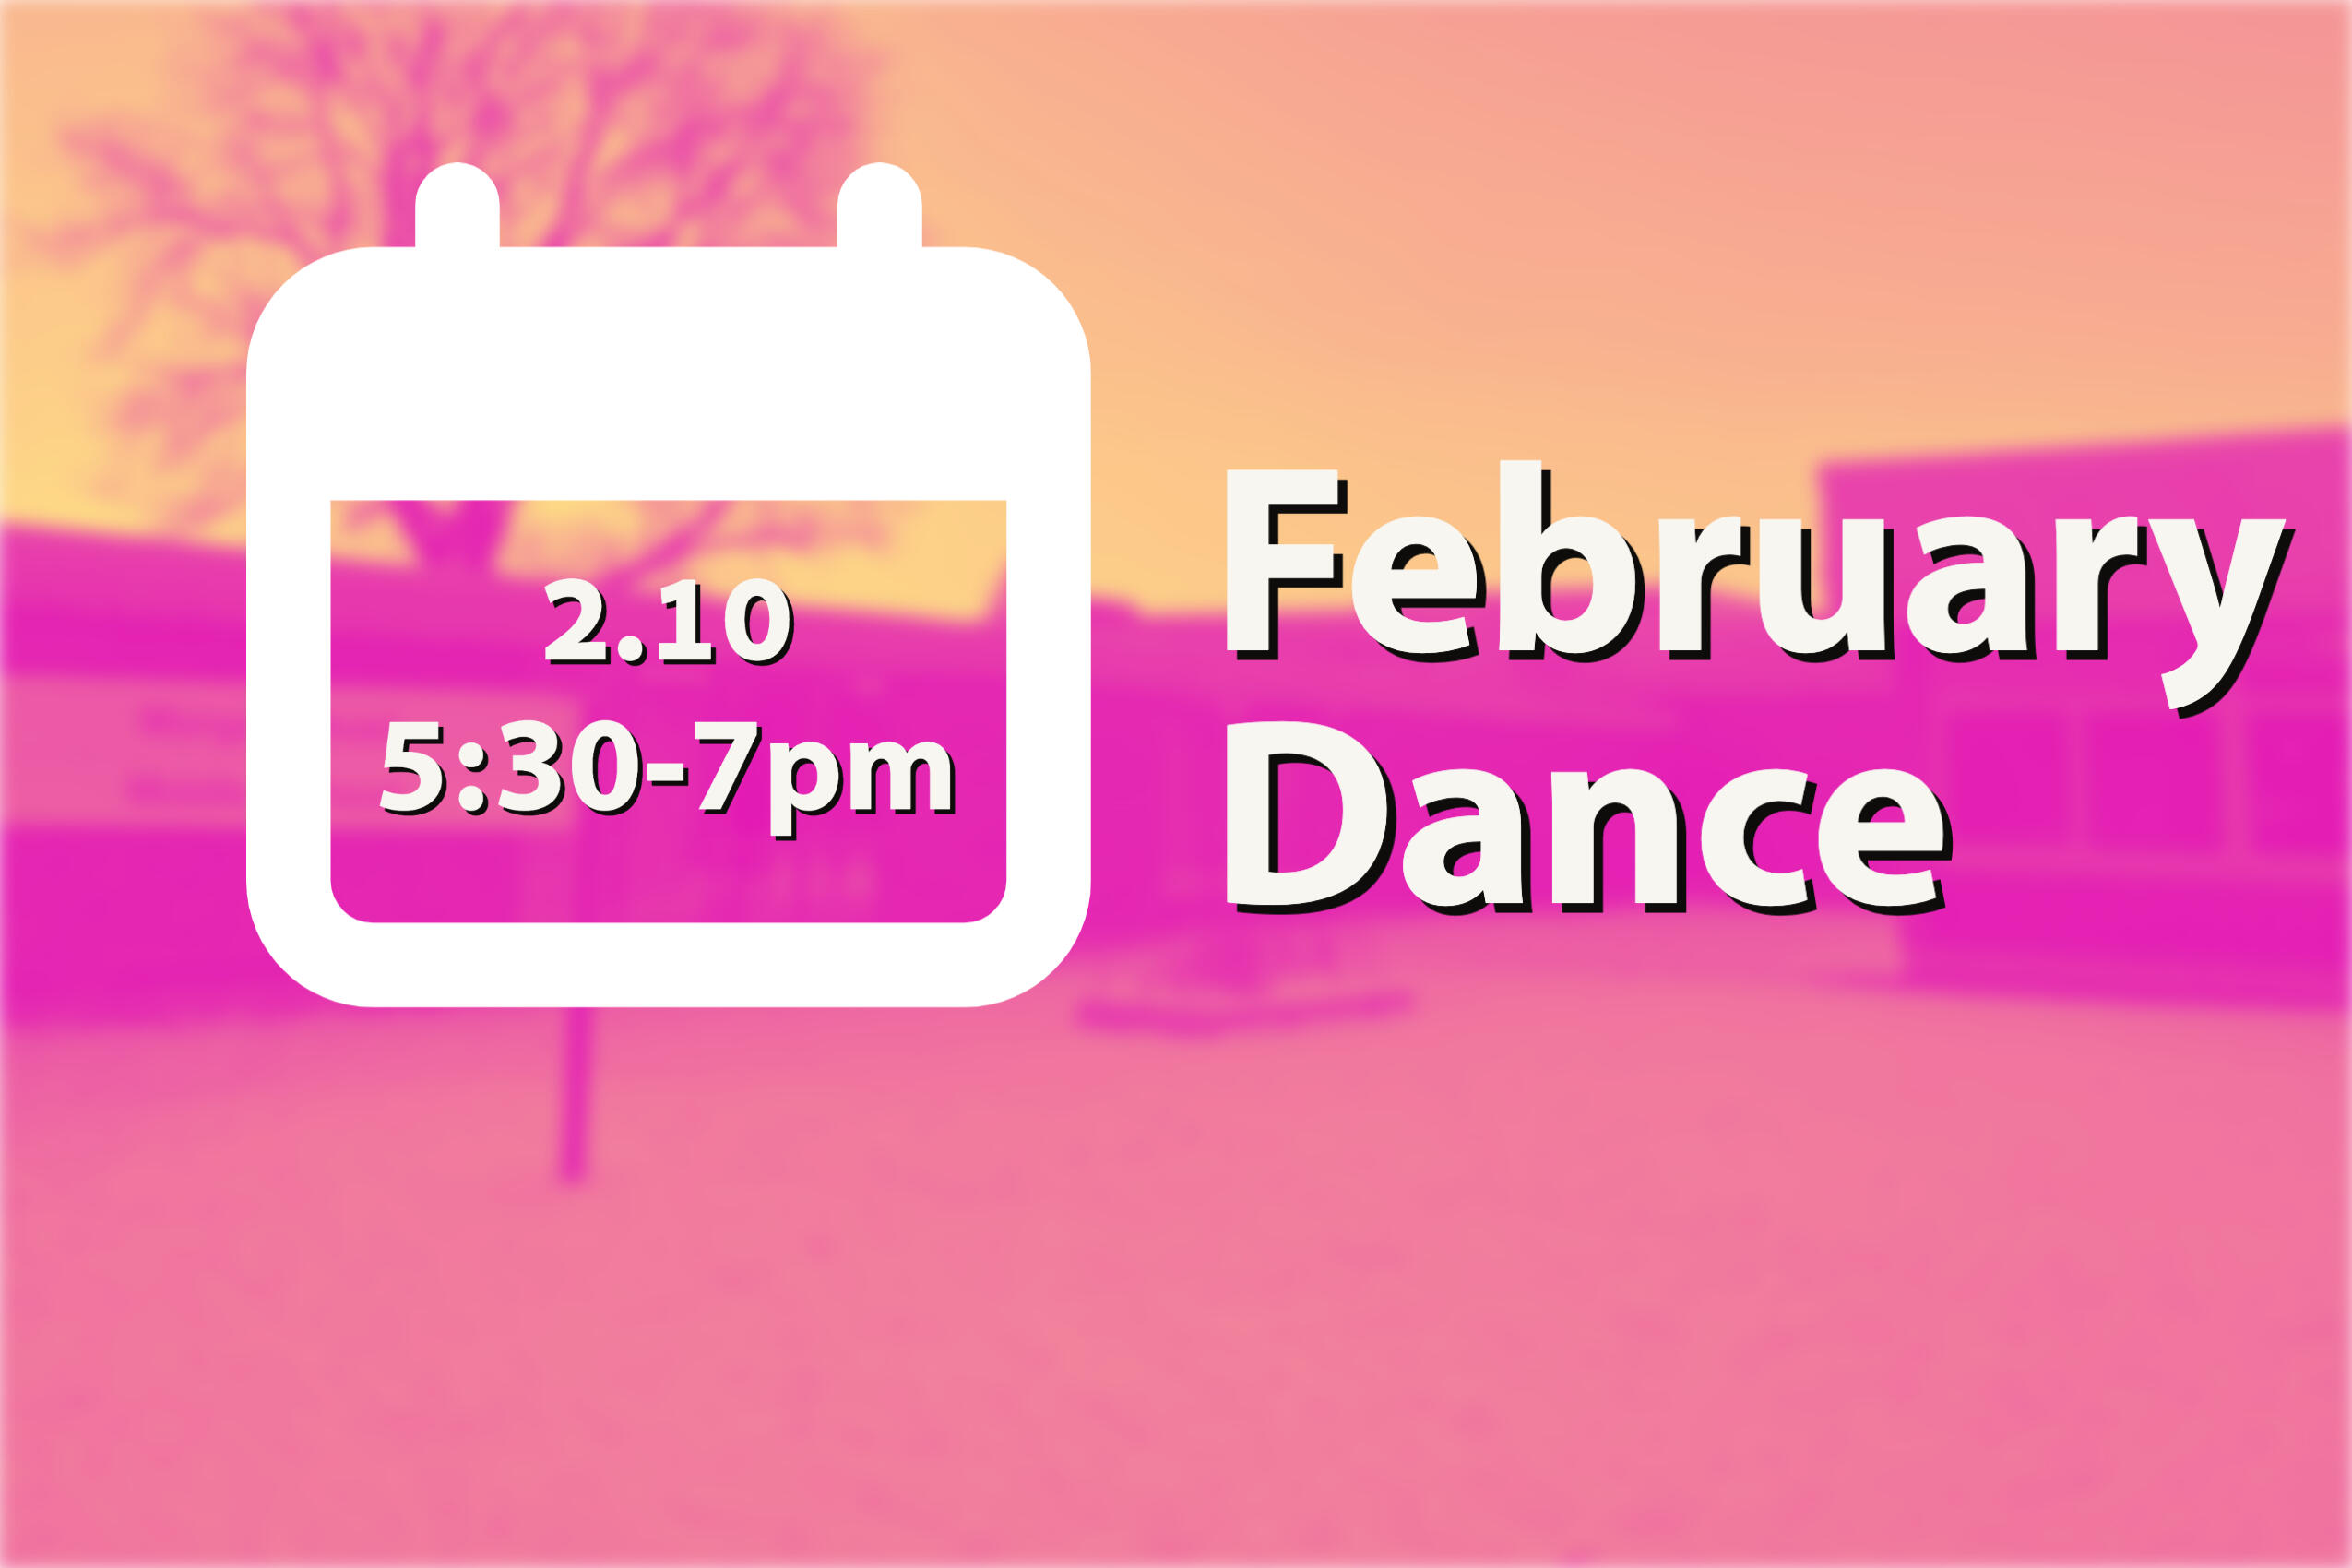 February Dance 2.10 5:30-7pm. $5 Tickets on Sale during Lunch